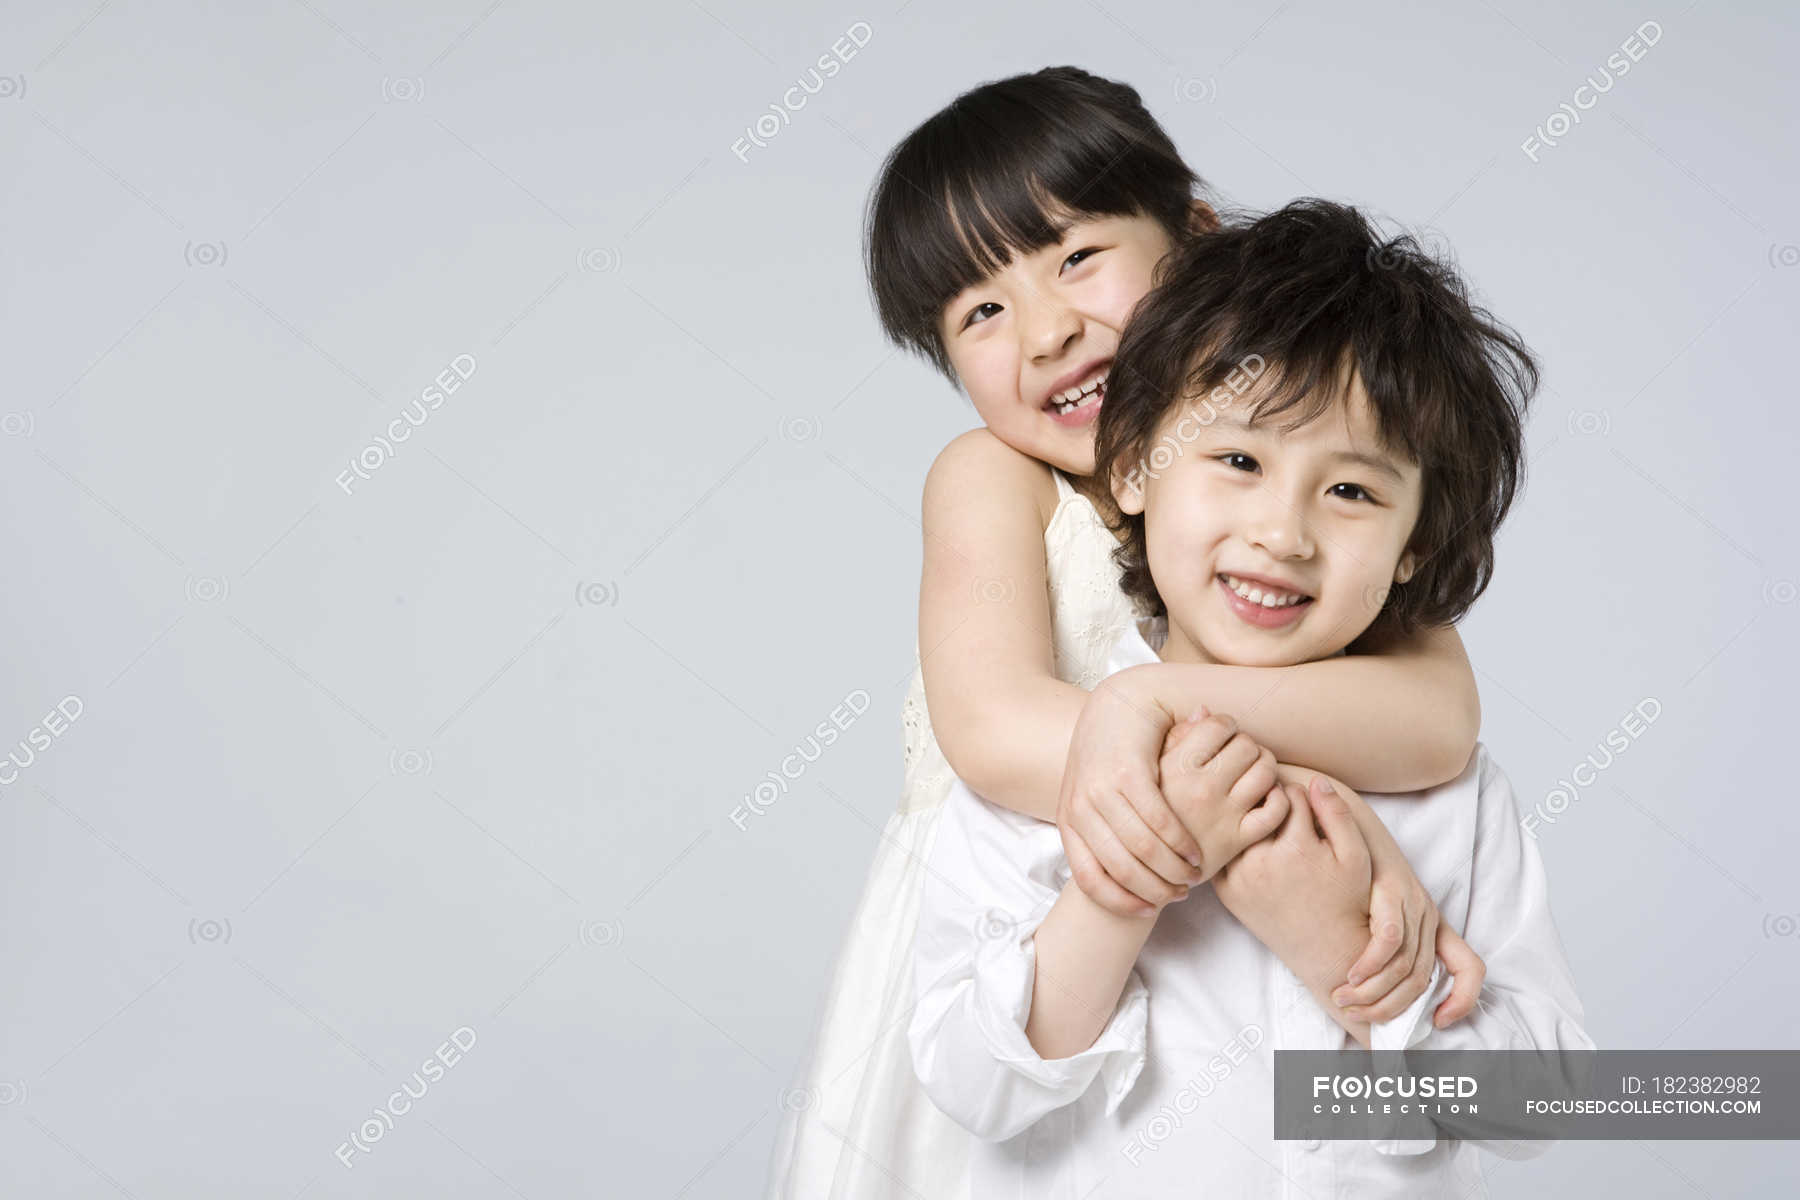 Asian brother and sister embracing on gray background — Elementary Age,  Waist Up - Stock Photo | #182382982